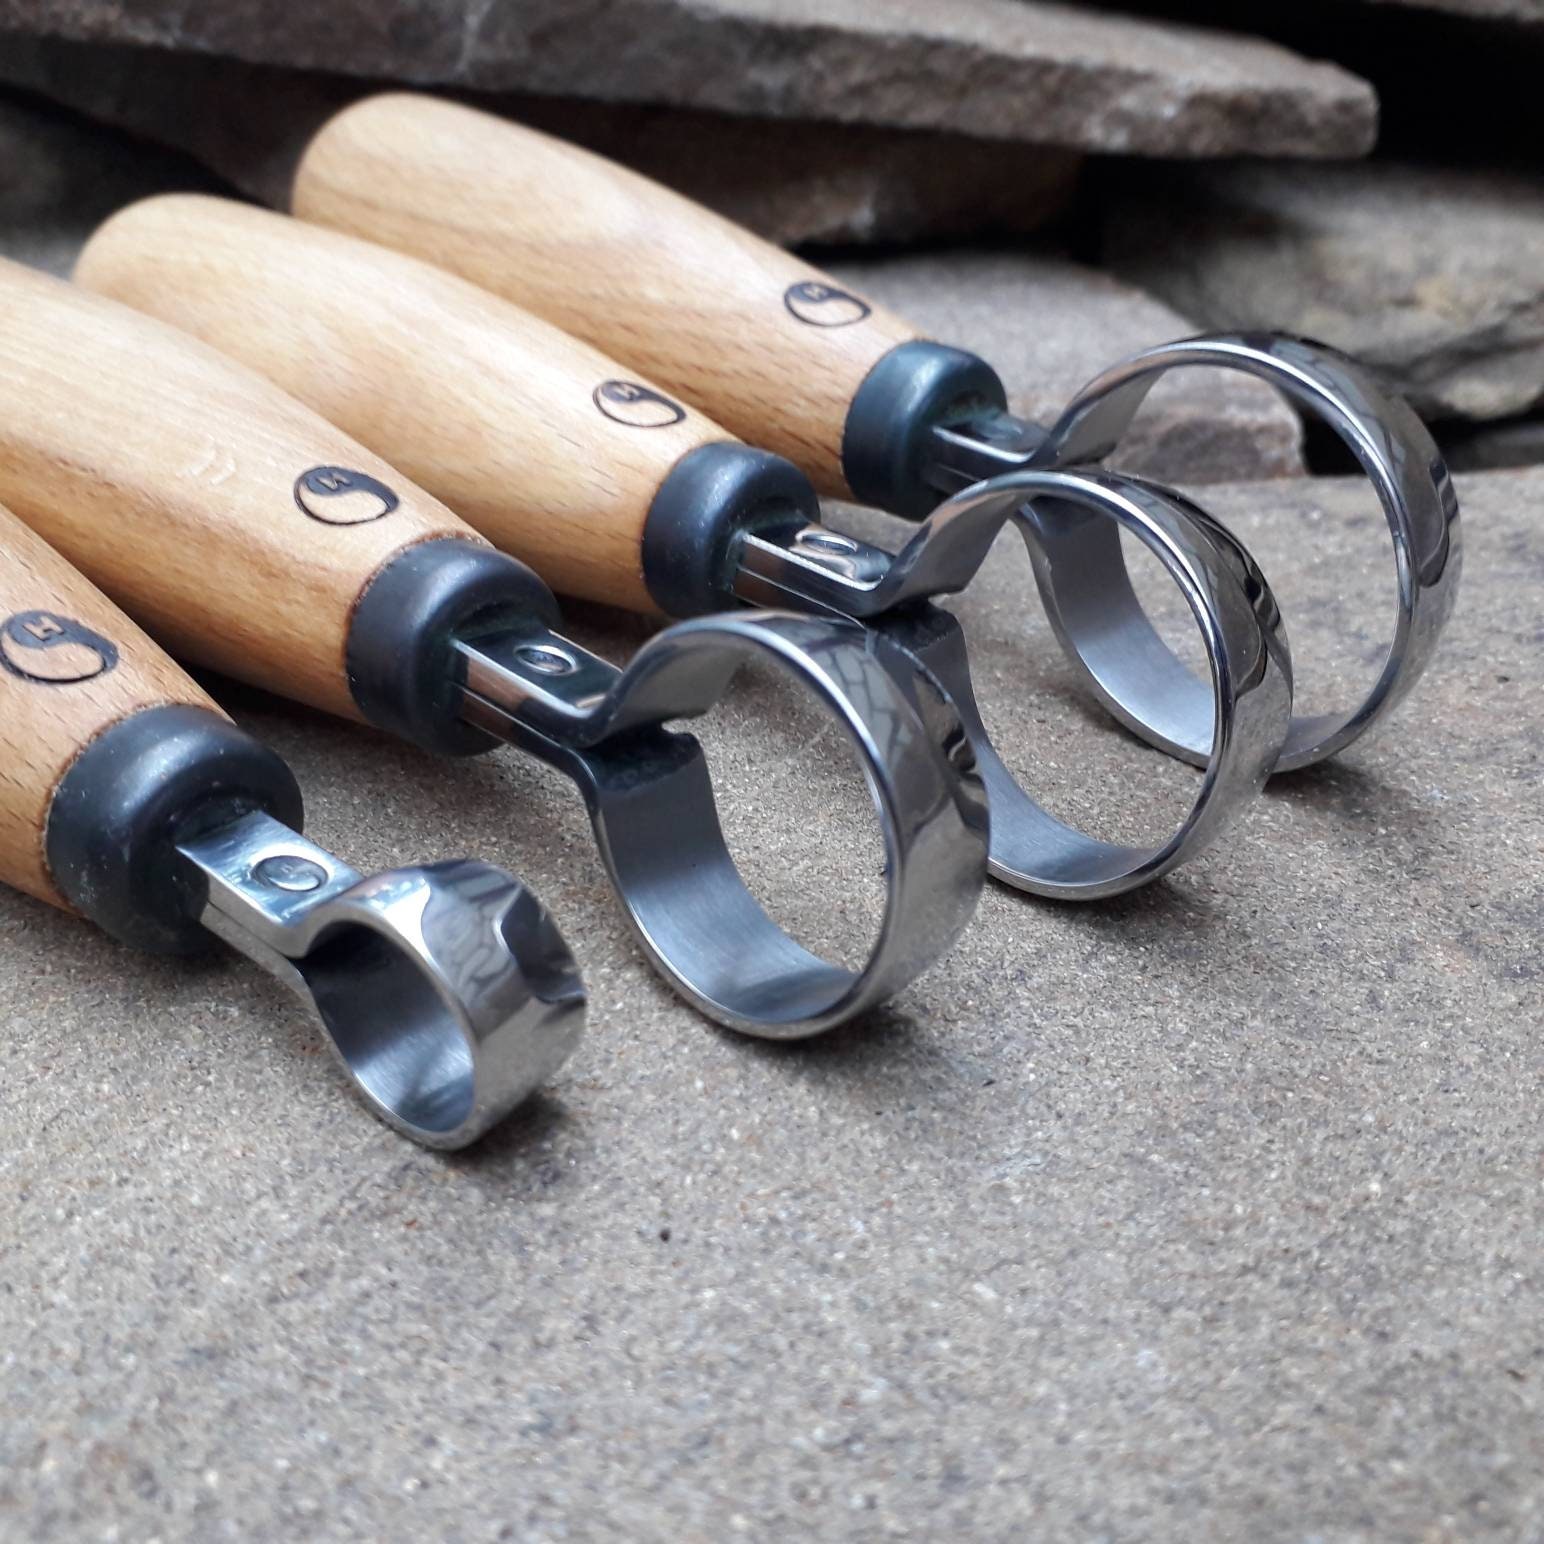 Hand Forged Tool Scorp. Tools for Carving Spoons. Wood Carving Tool. 